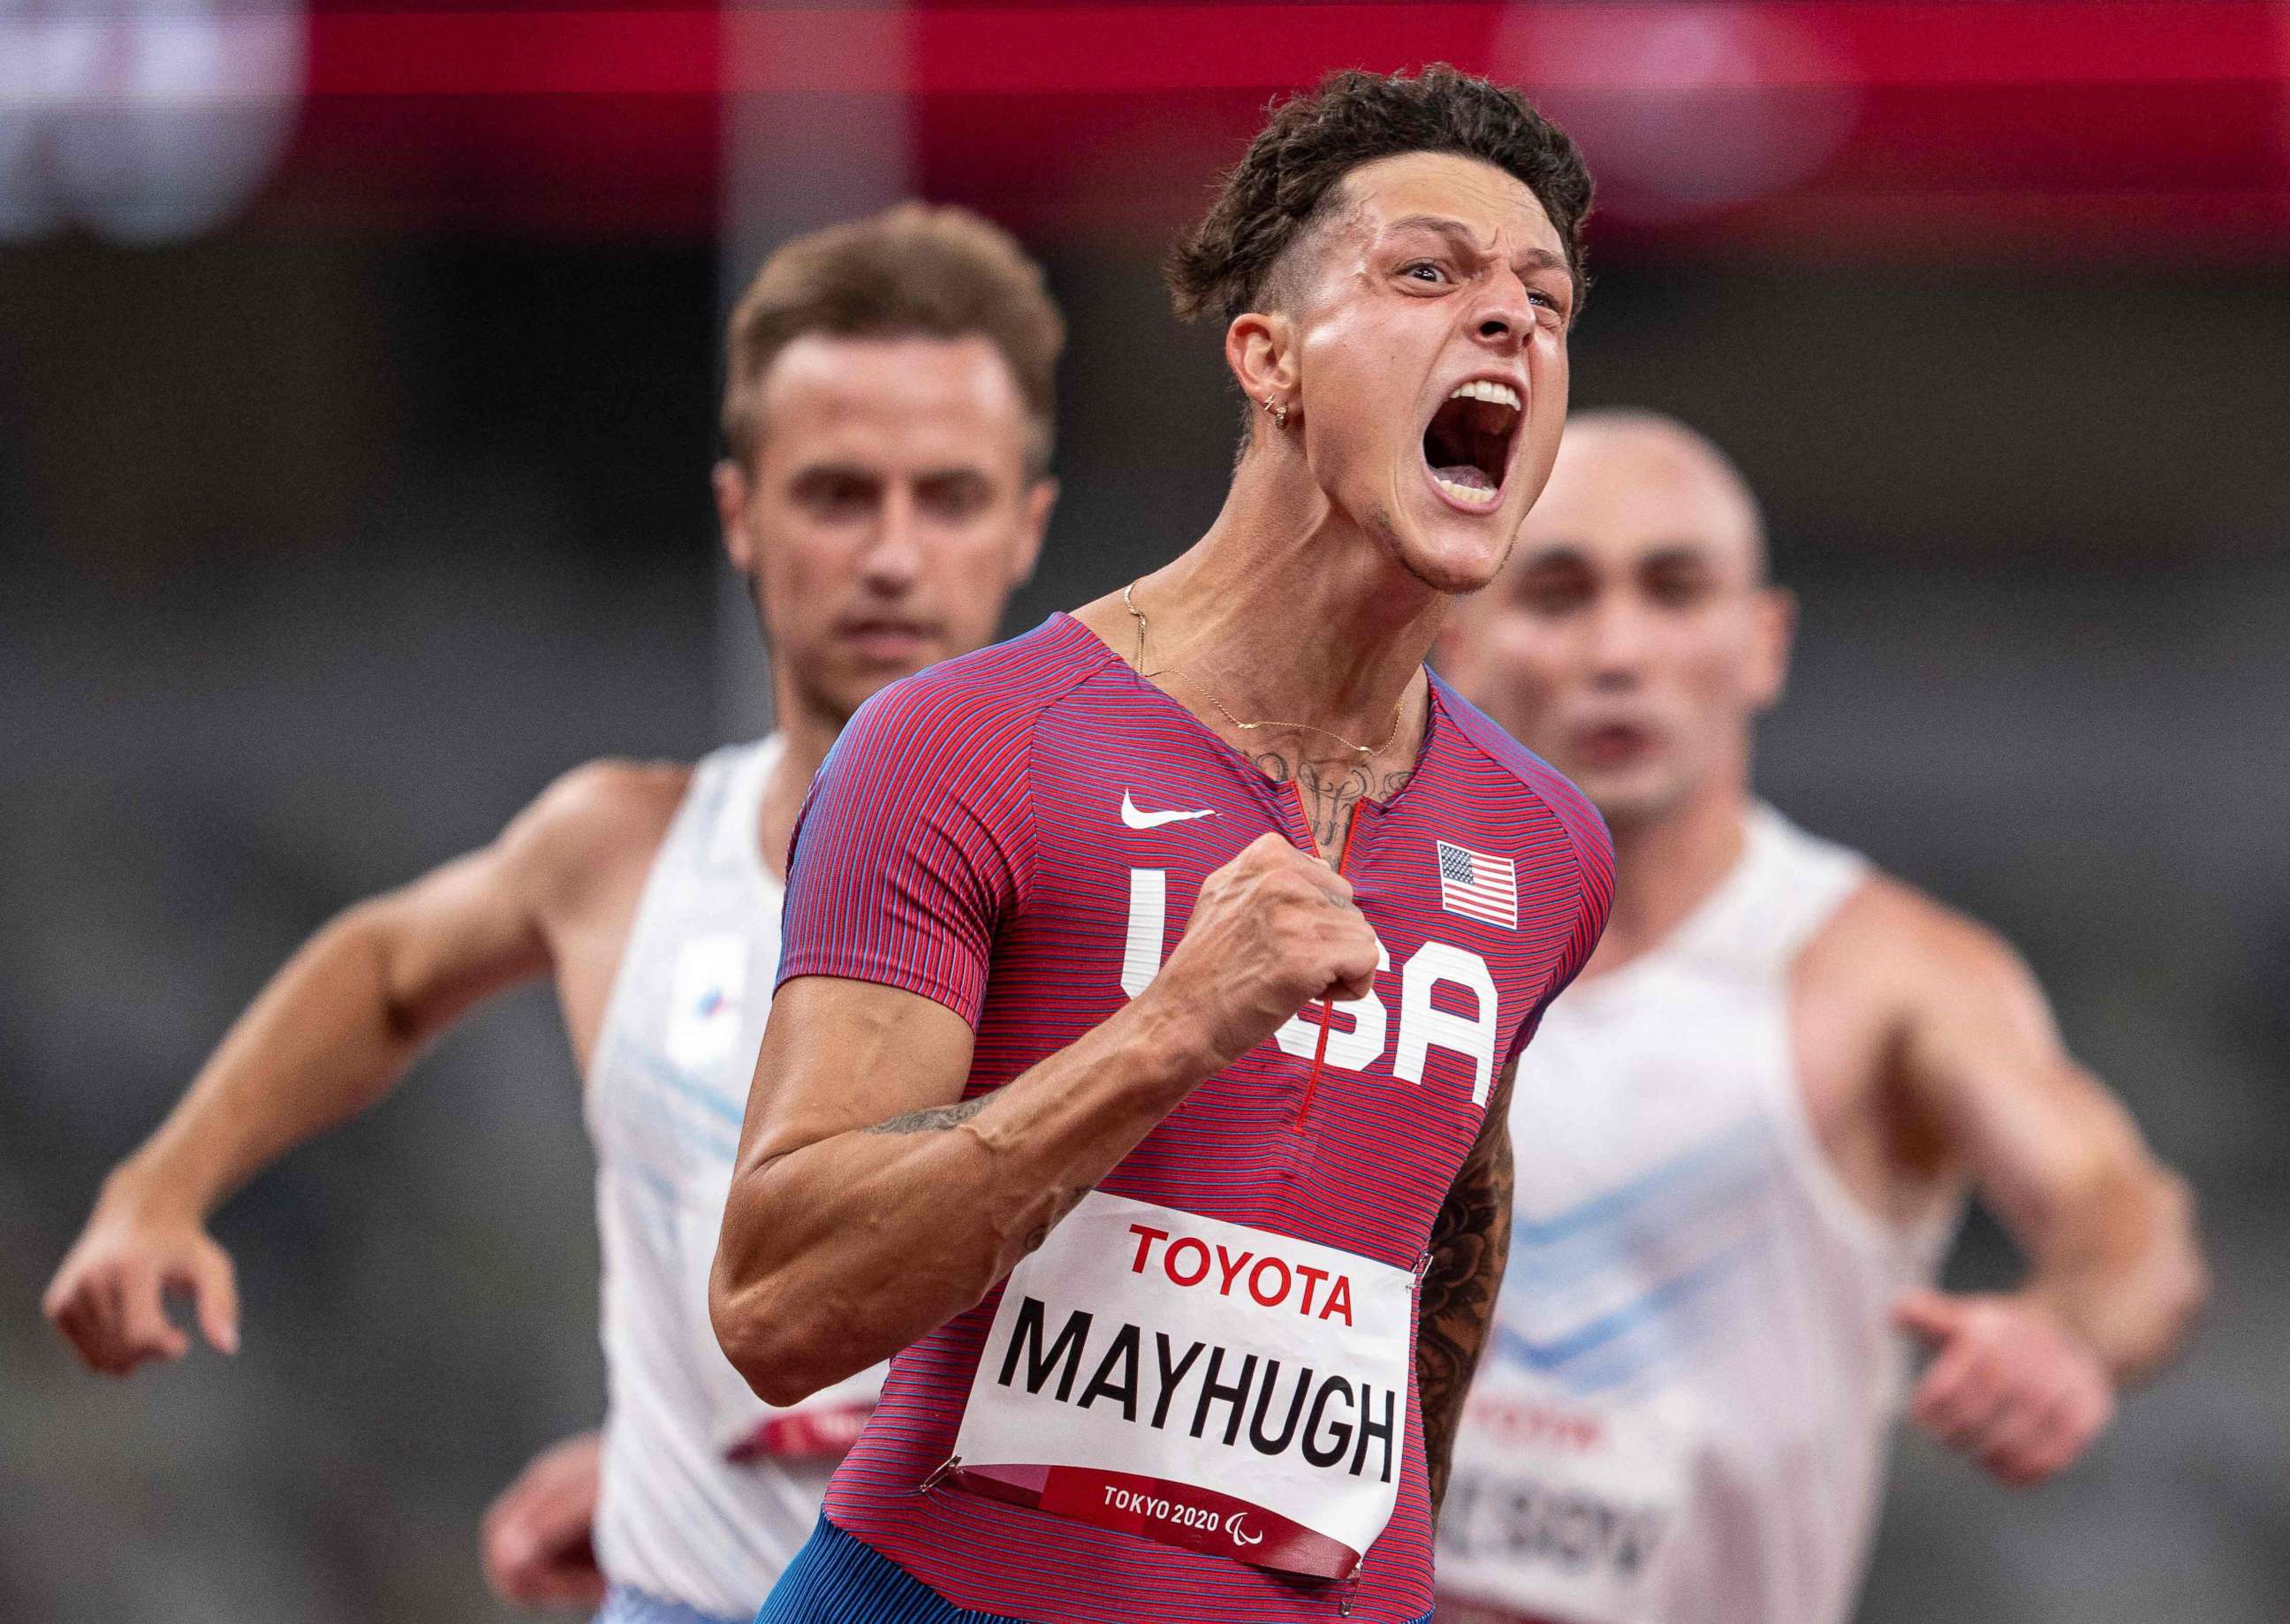 PHOTO: In this handout photo from the OIS of the IOC taken and released on Aug. 27, 2021, USA's Nick Mayhugh breaks the world record and wins the gold medal in the mens 100m T37 final during the Tokyo 2020 Paralympic Games at the Olympic Stadium in Tokyo.